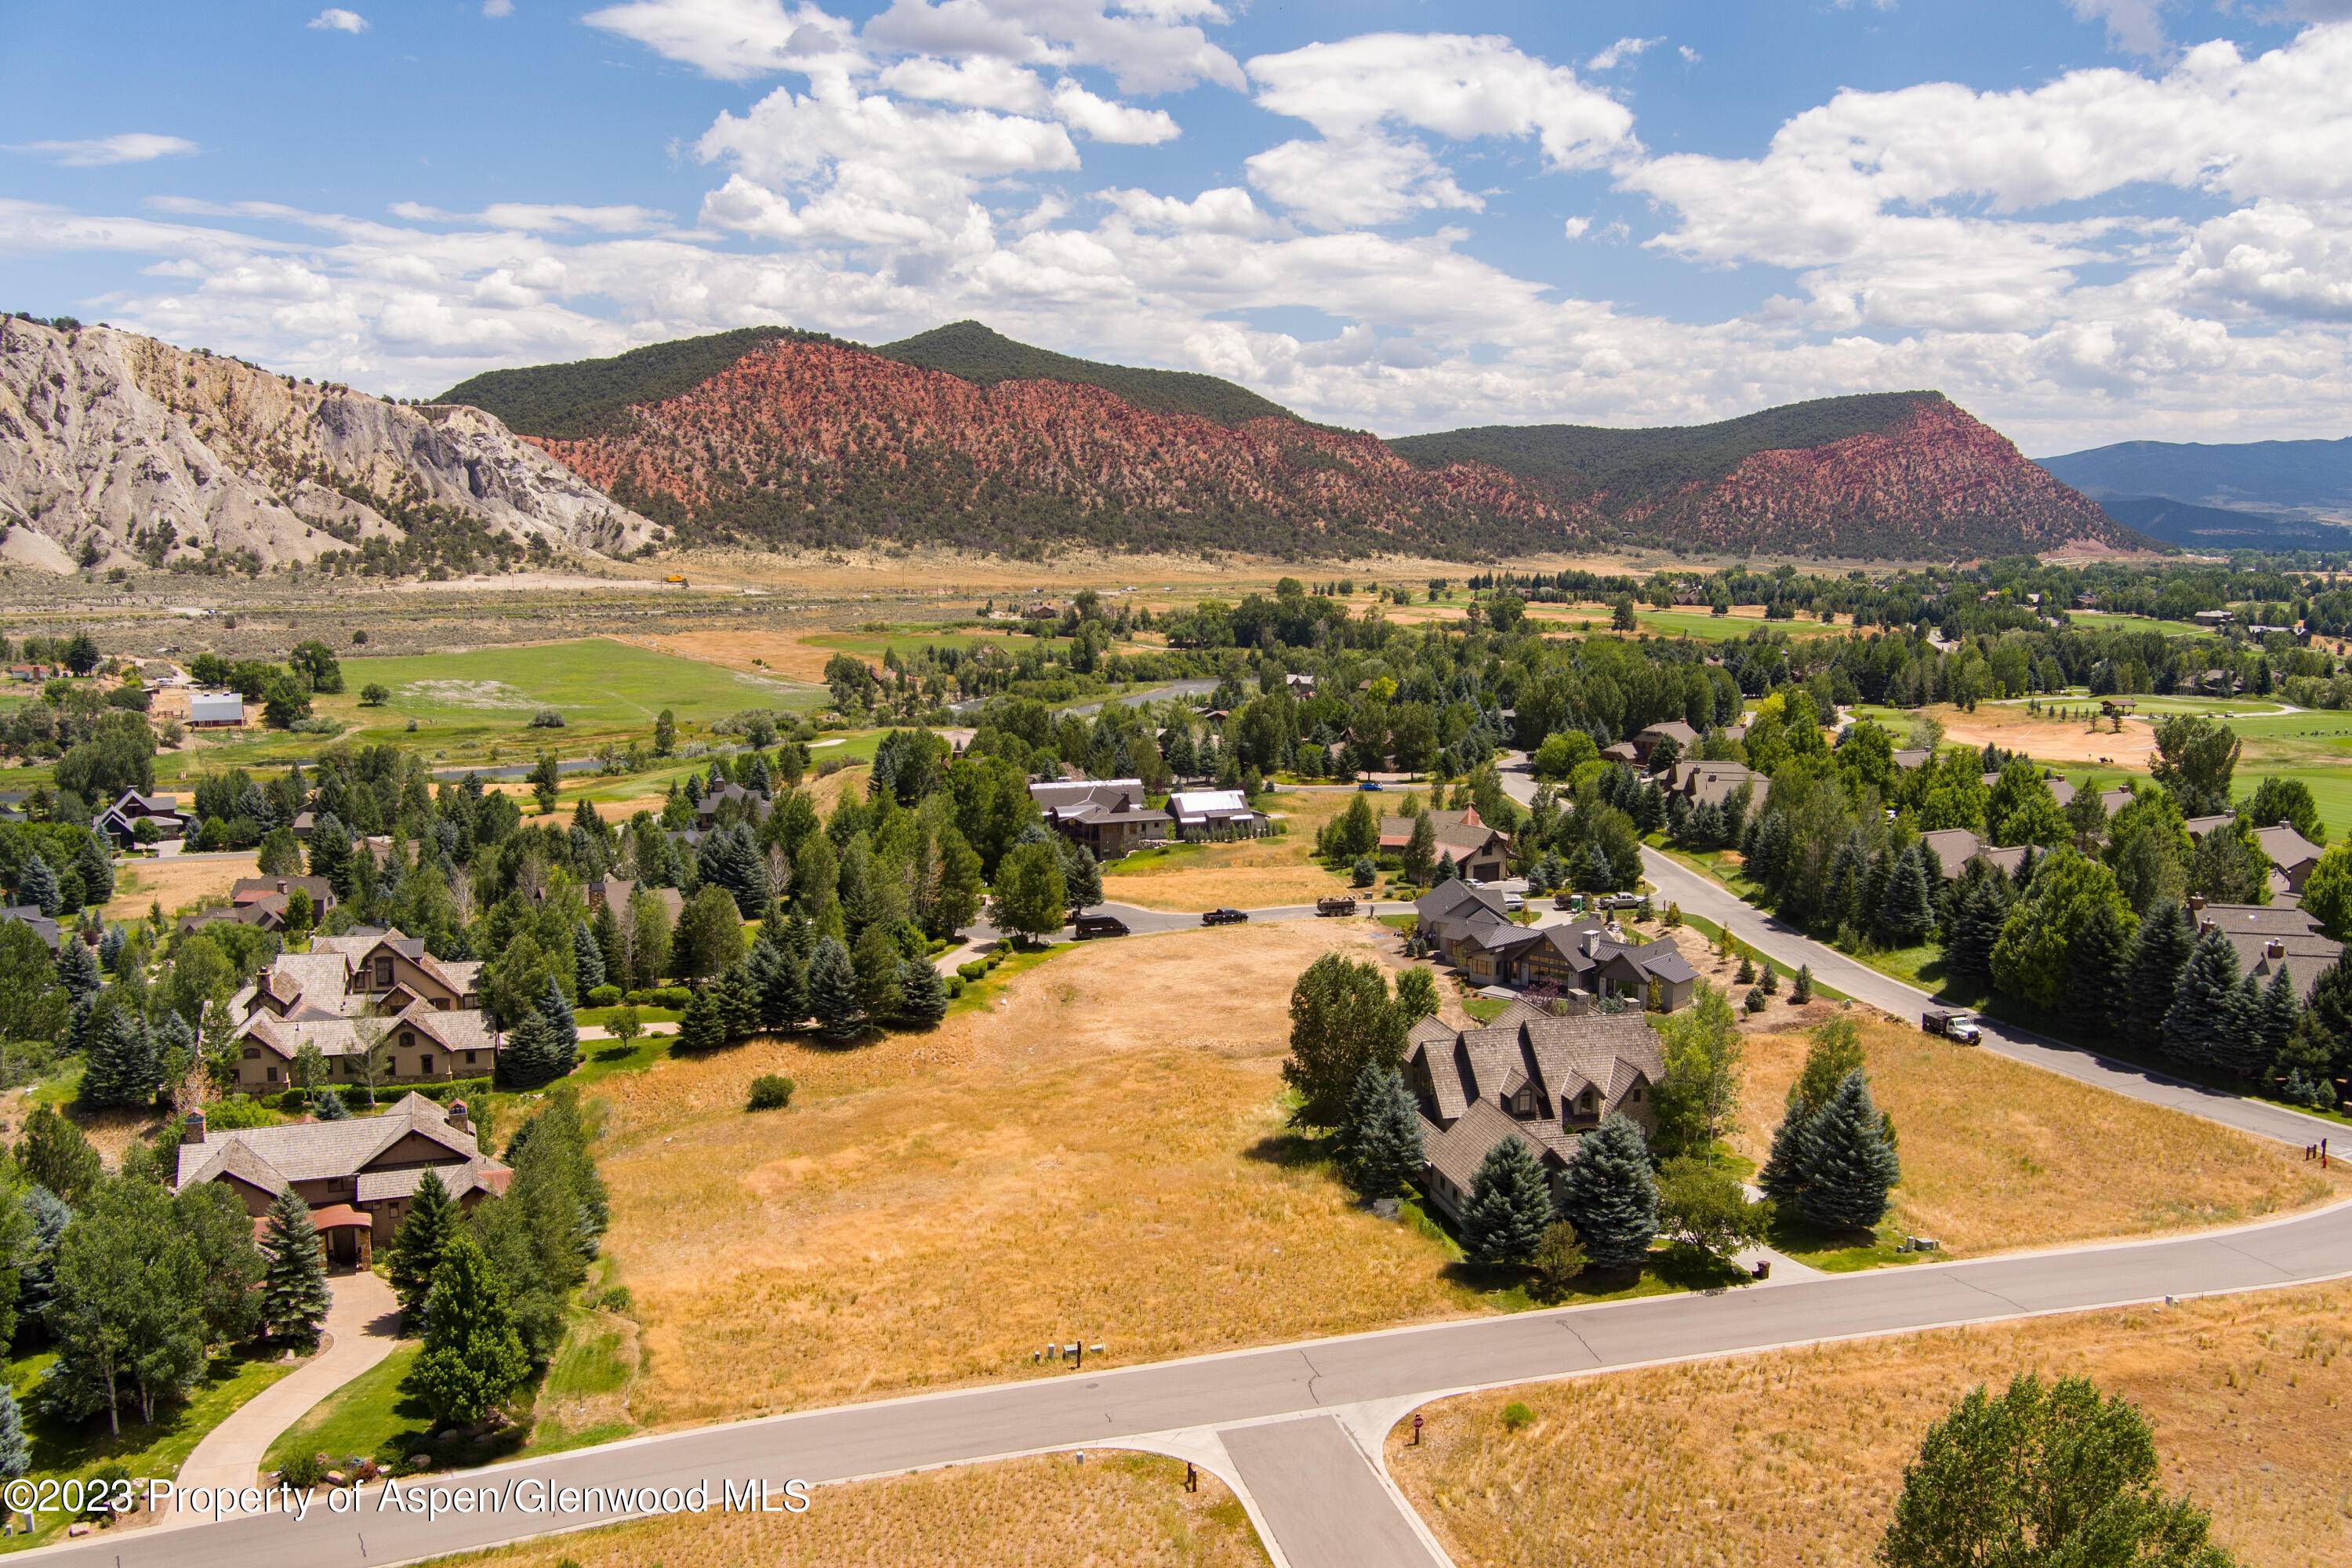 Enjoy beautiful sunset views of the red bluffs, sunrise views, and stunning mountain views down valley from this beautiful ½ acre lot in the Aspen Glen Club.